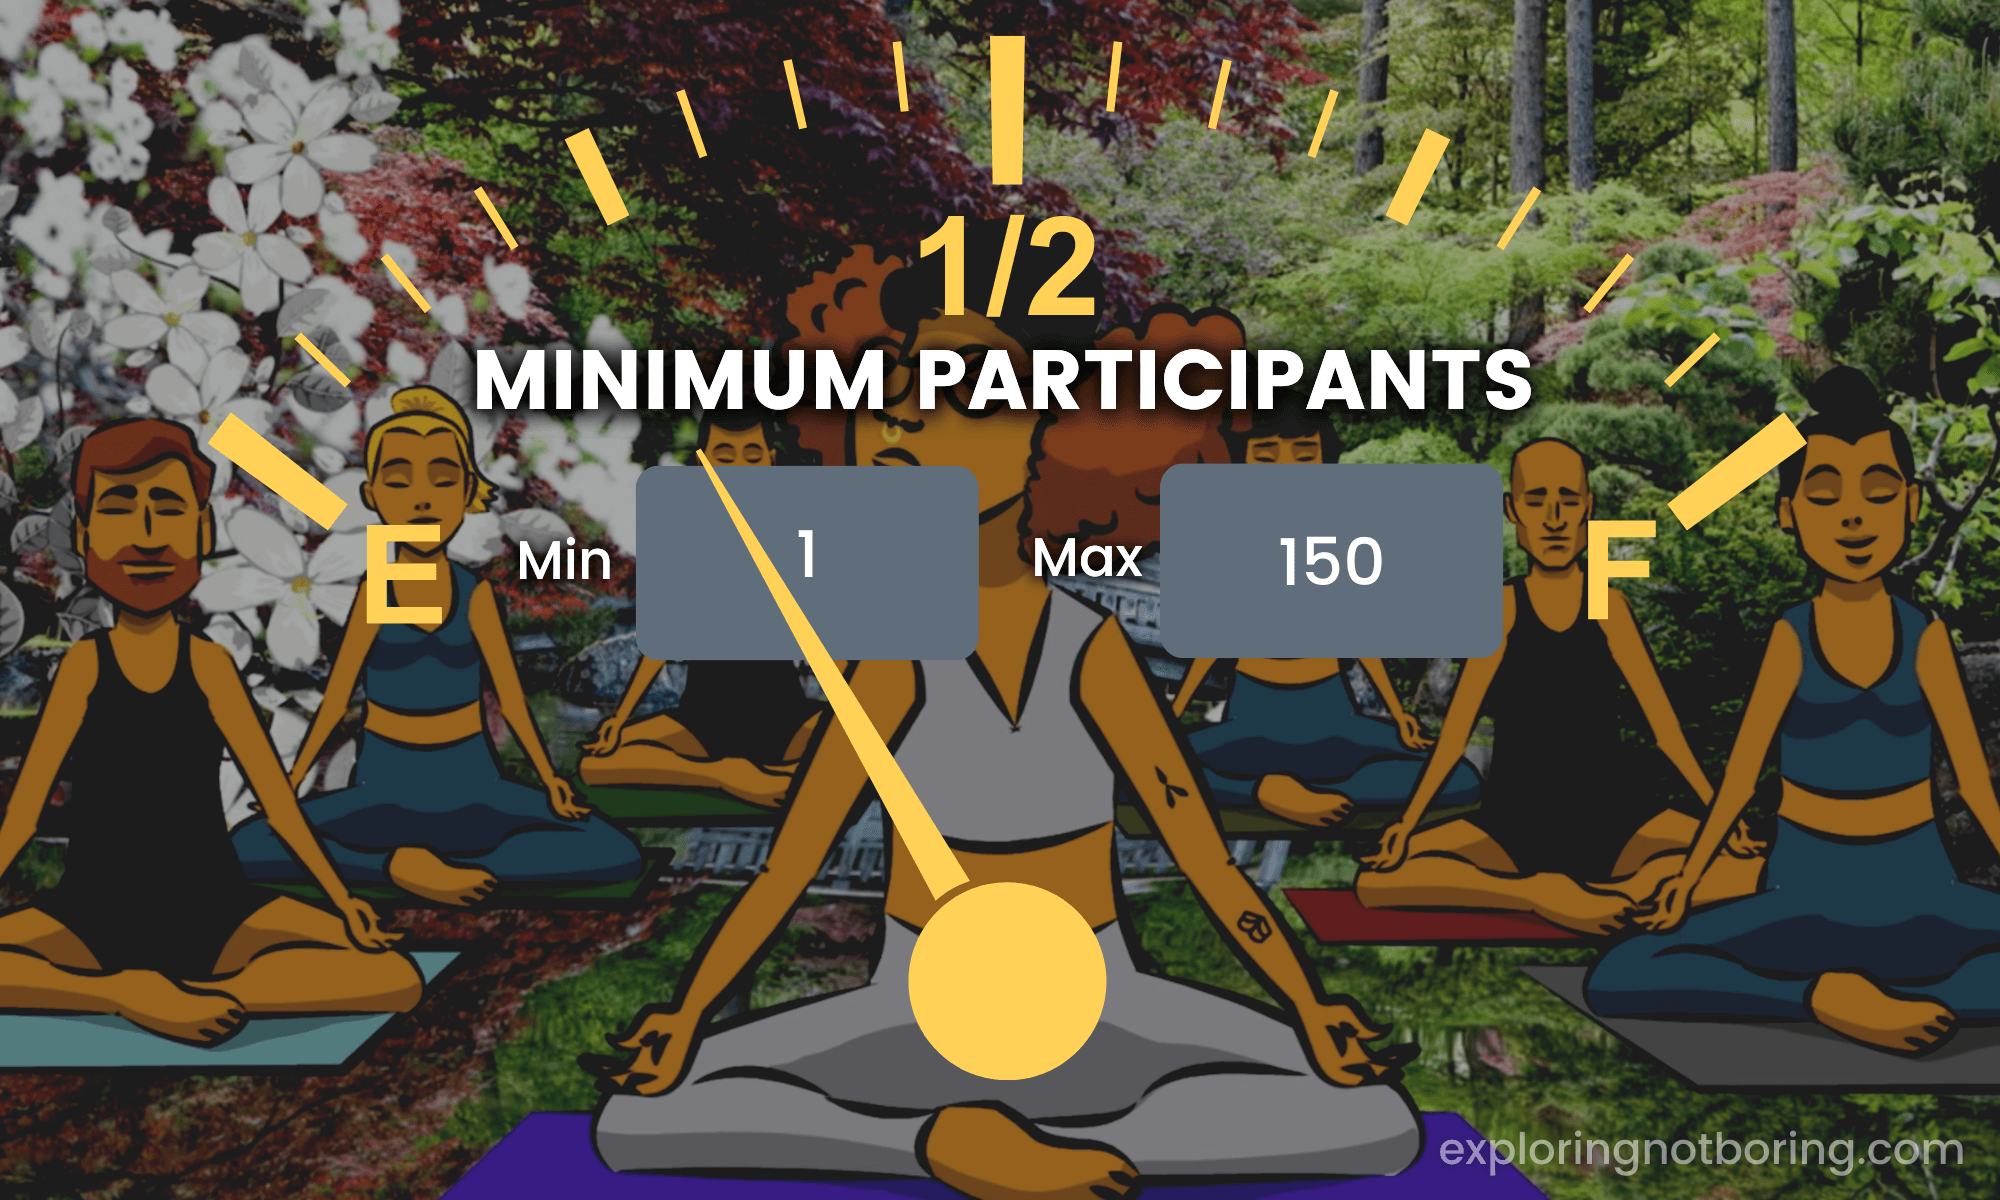 Graphic image showcasing a Yoga Activity and an overlayed gauge for Minimum Participants